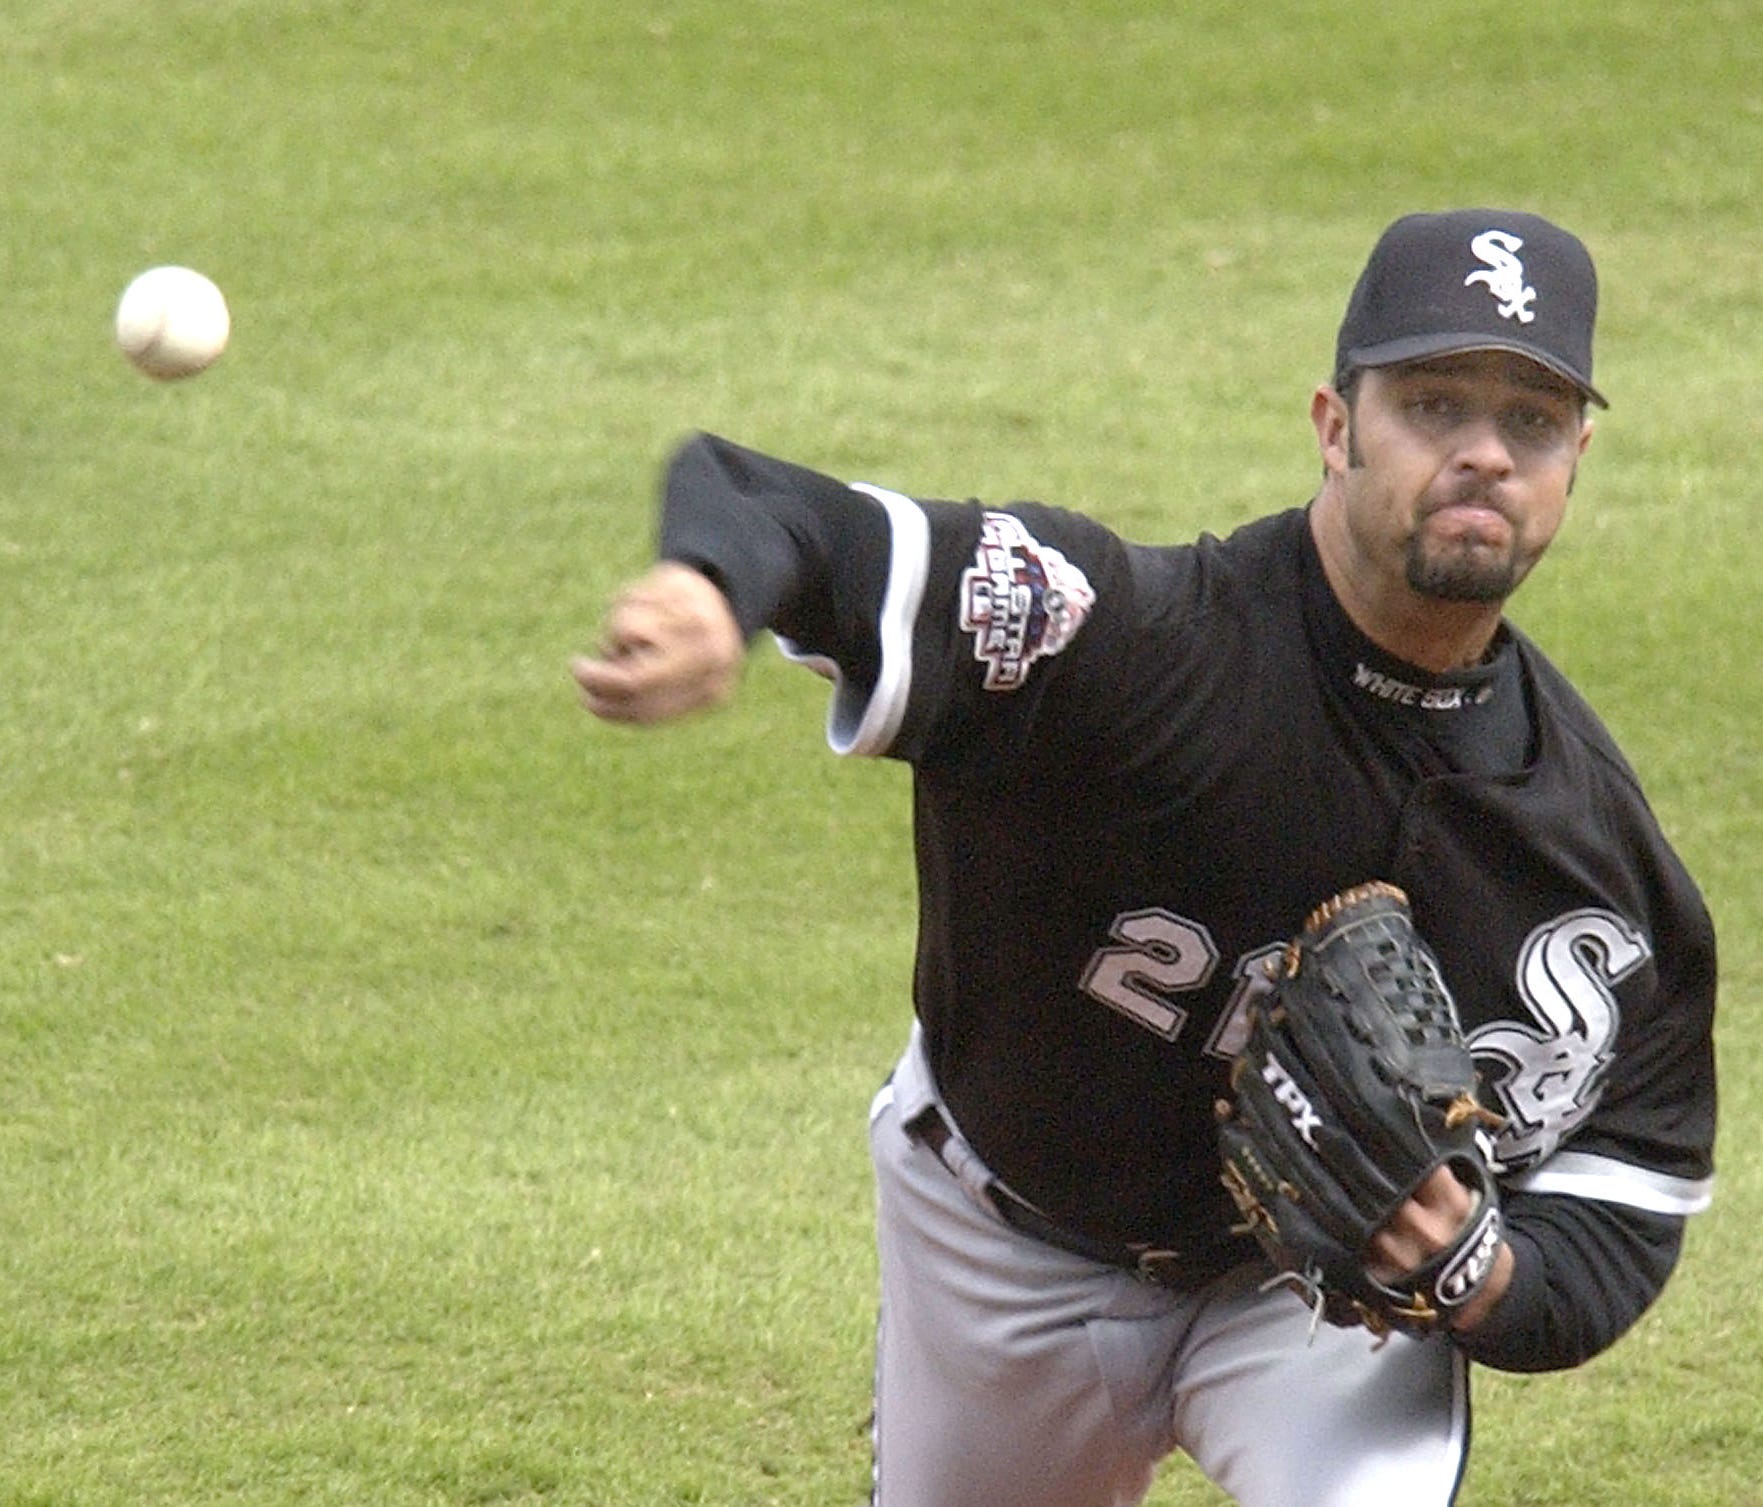 Chicago White Sox starting pitcher Esteban Loaiza delivers a pitch during the second inning against the Kansas City Royals Sunday, Sept 28, 2003 at Kauffman Stadium in Kansas City, Mo. (AP Photo/Charlie Riedel) ORG XMIT: KCAR101